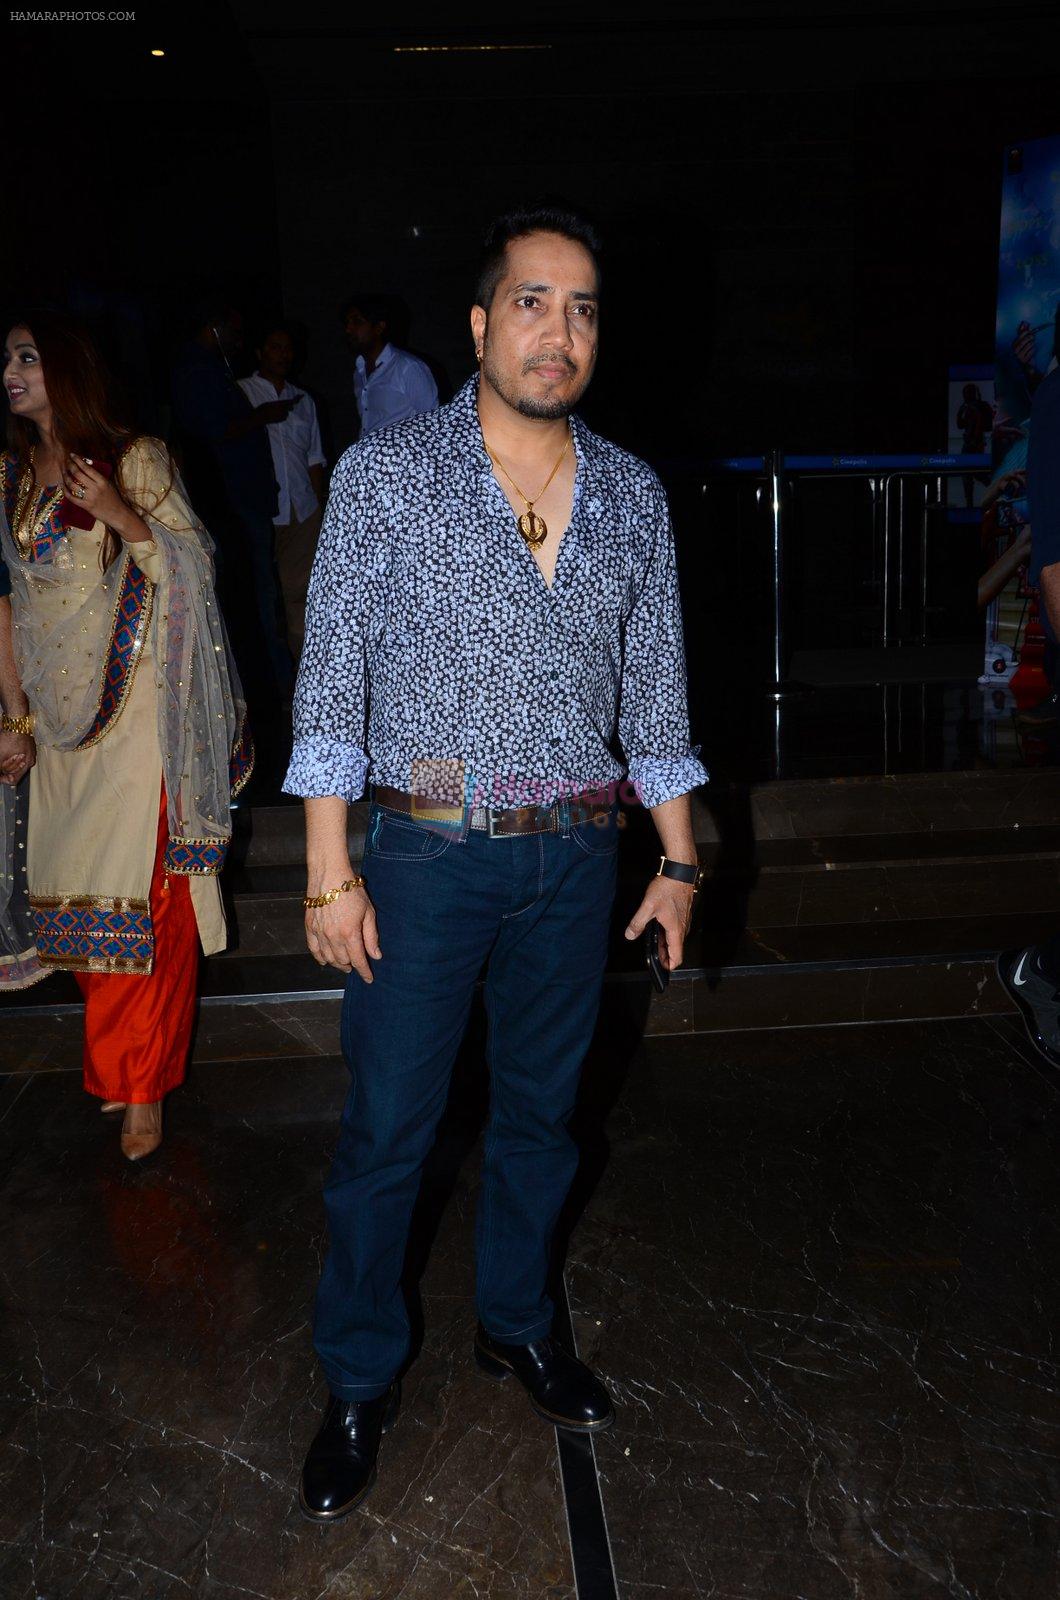 Mika Singh at Bollywood Diaries and Tere Bin Laden 2 screening in Cinepolis on 25th Feb 2016